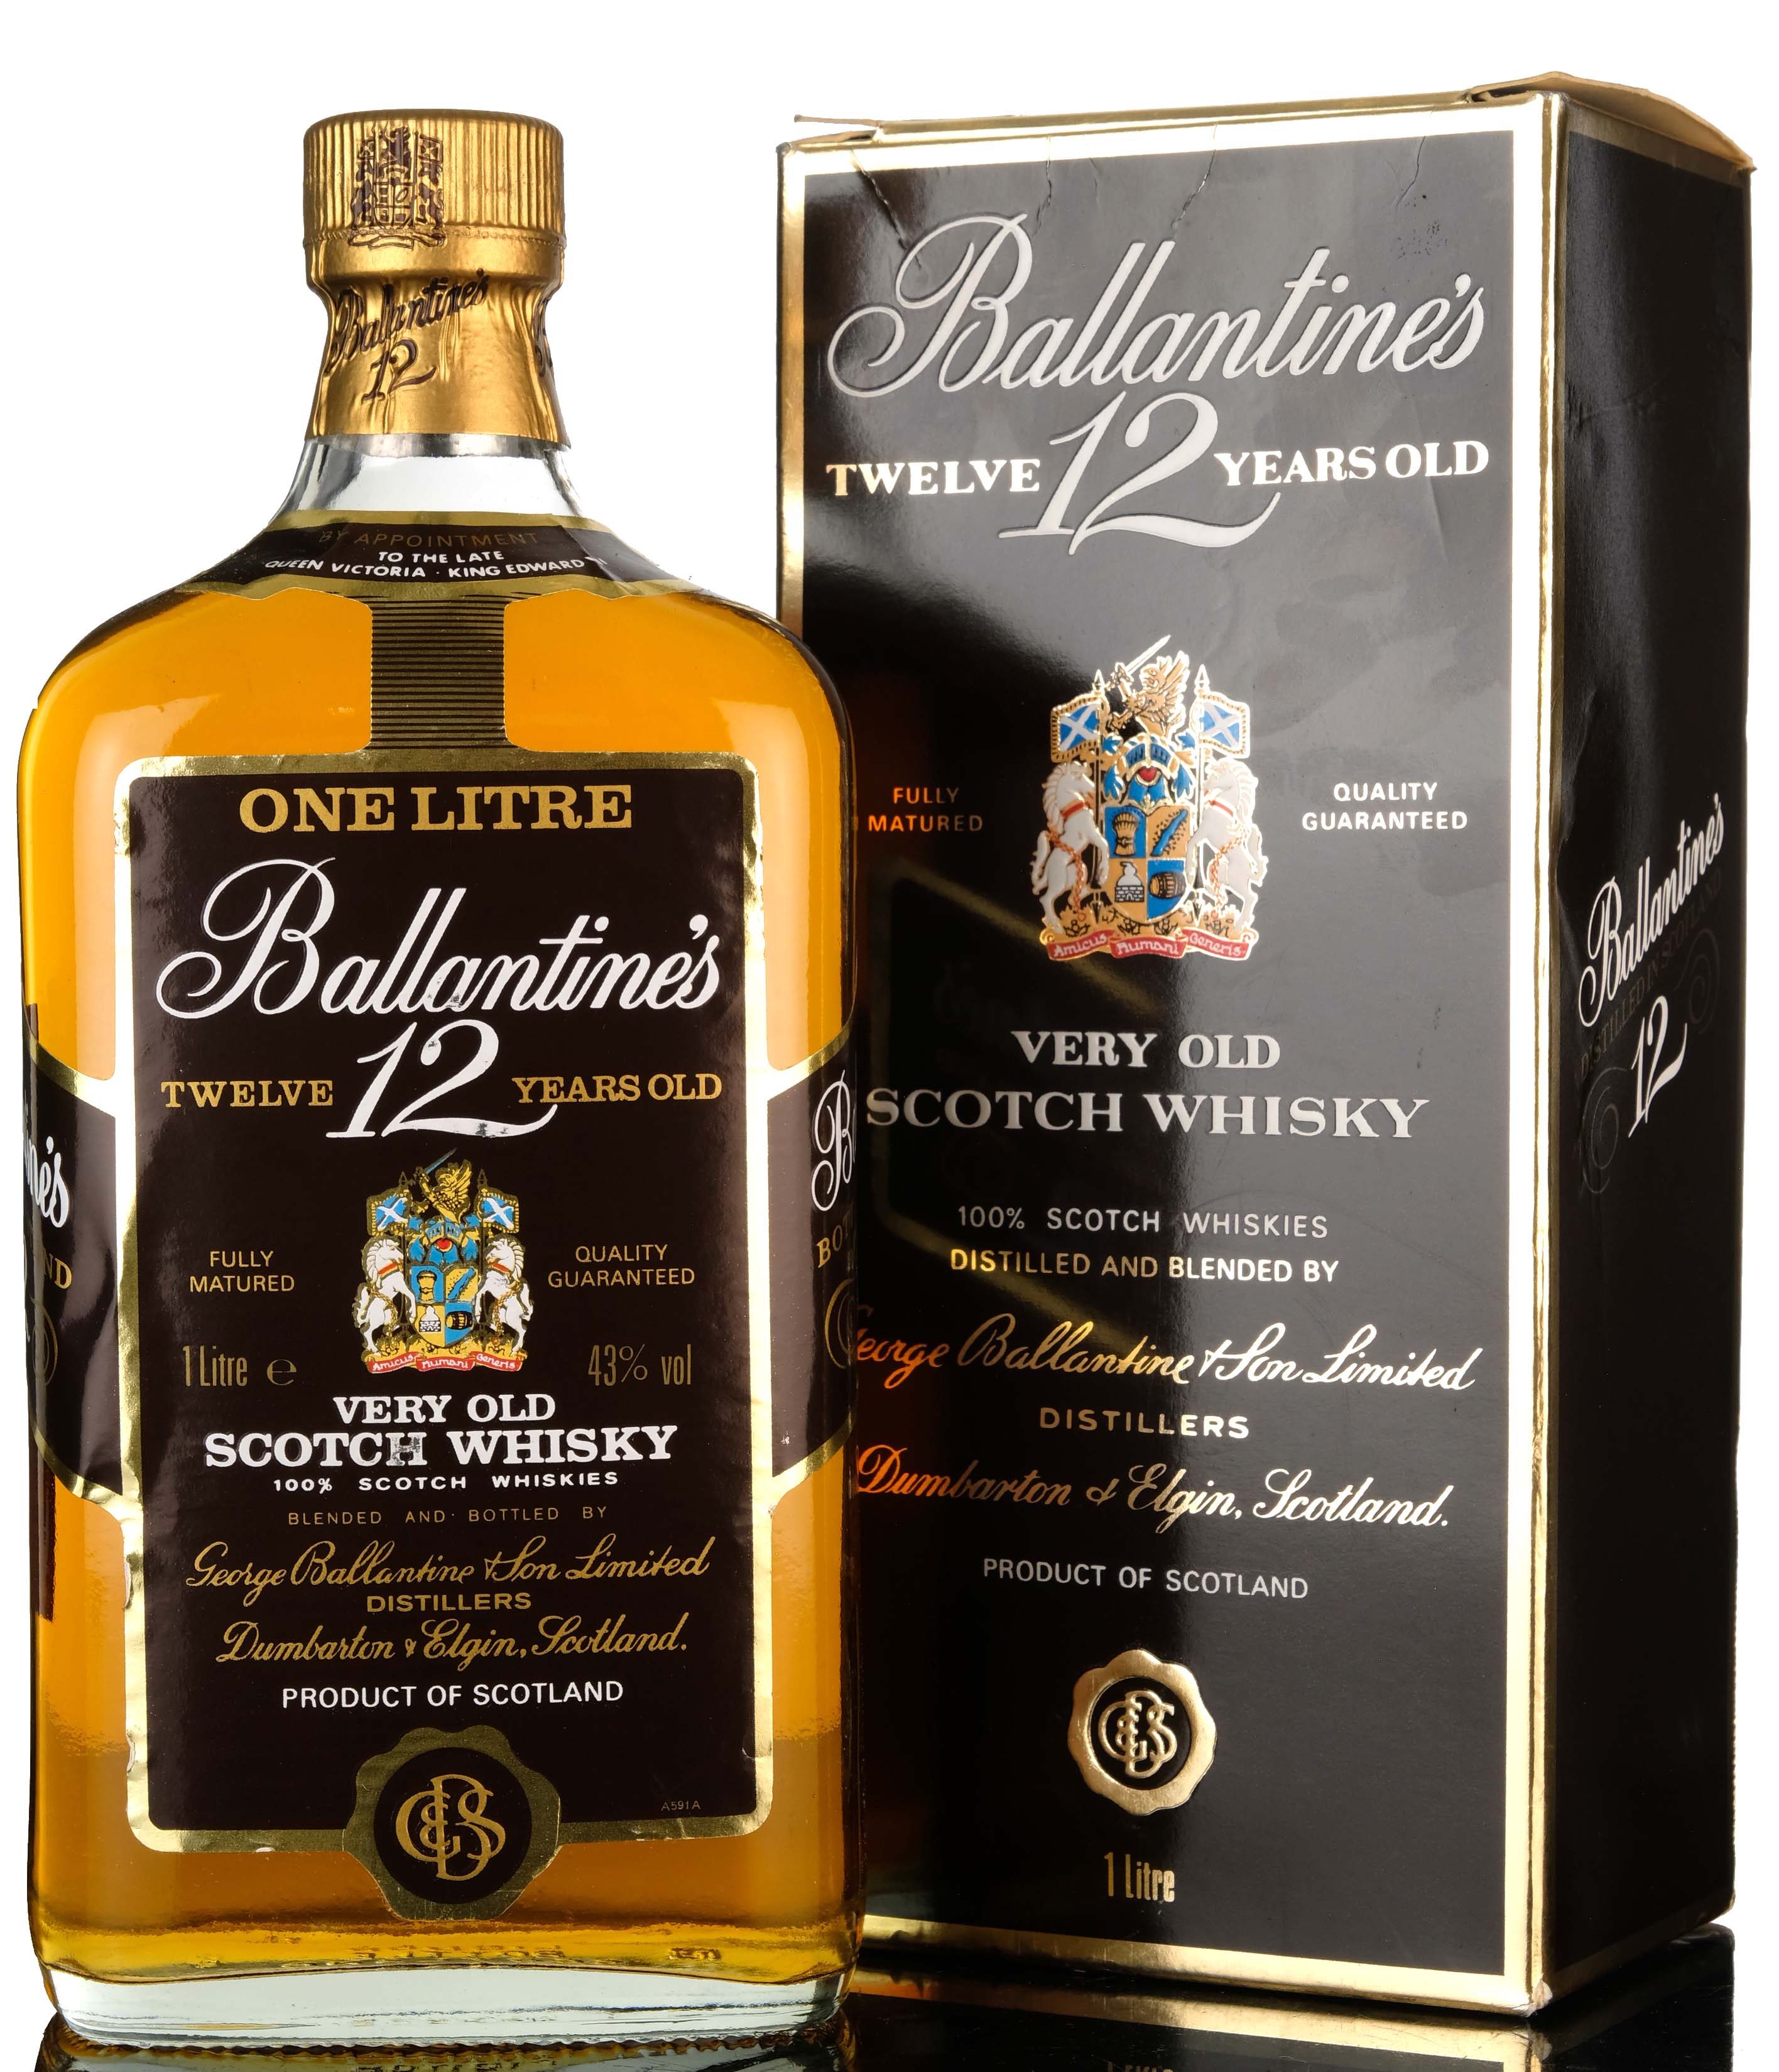 Ballantines 12 Year Old - 1 Litre